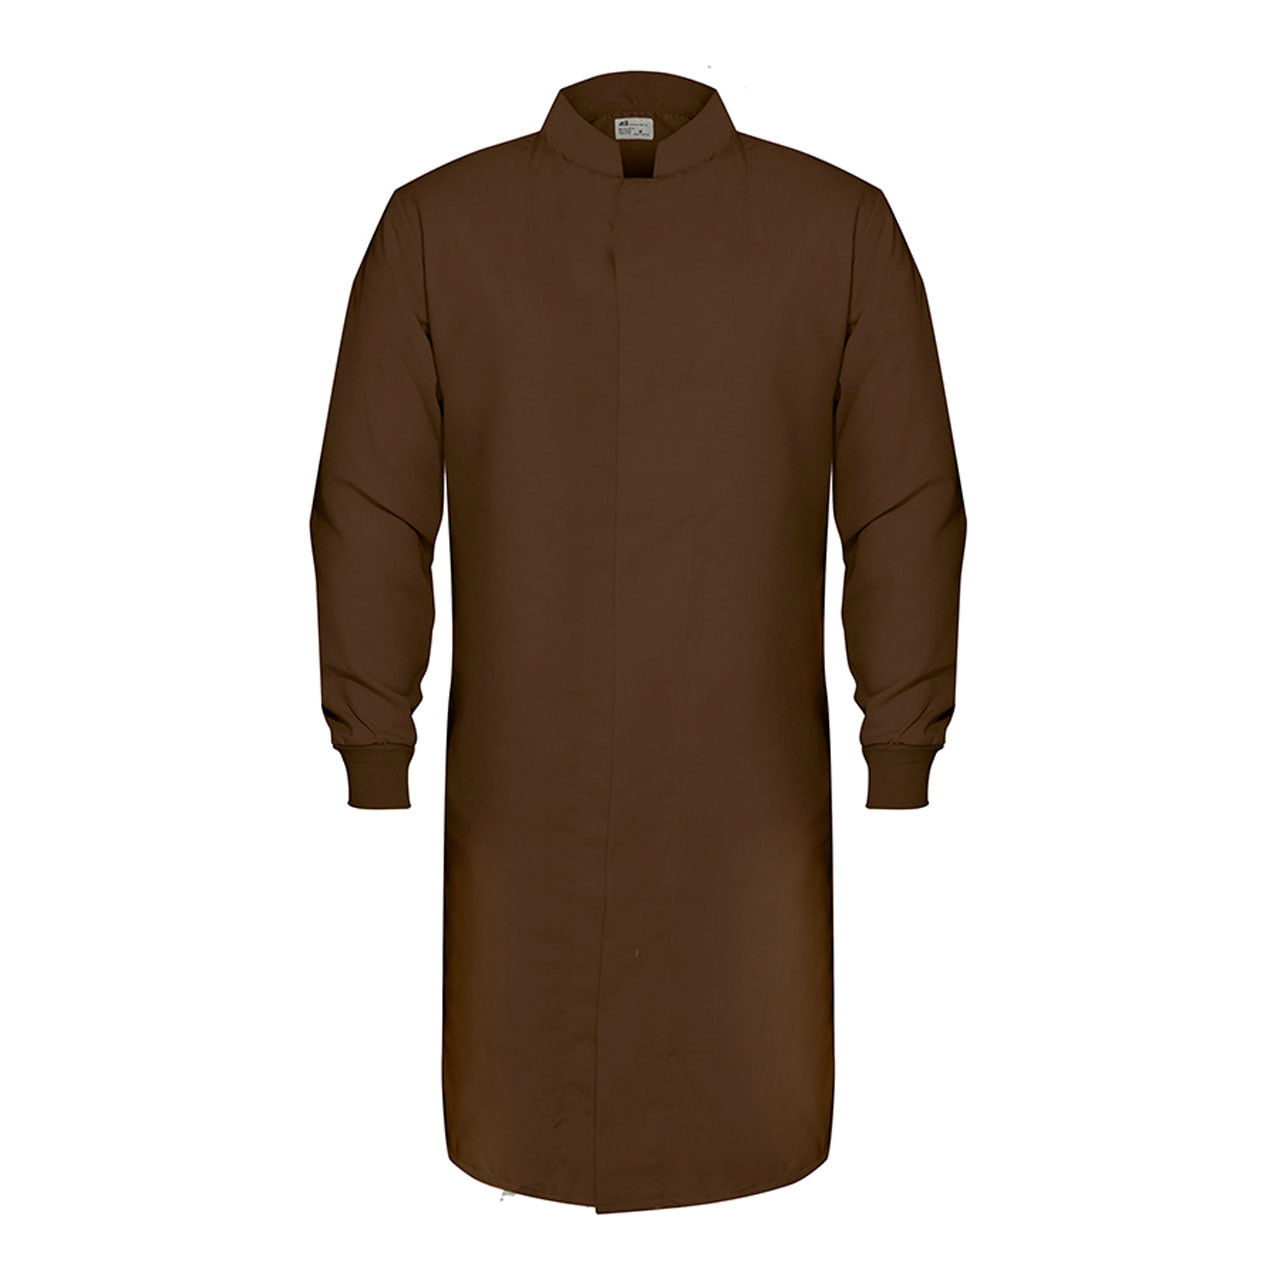 What are the lengths of the different sizes for the brown lab coat?